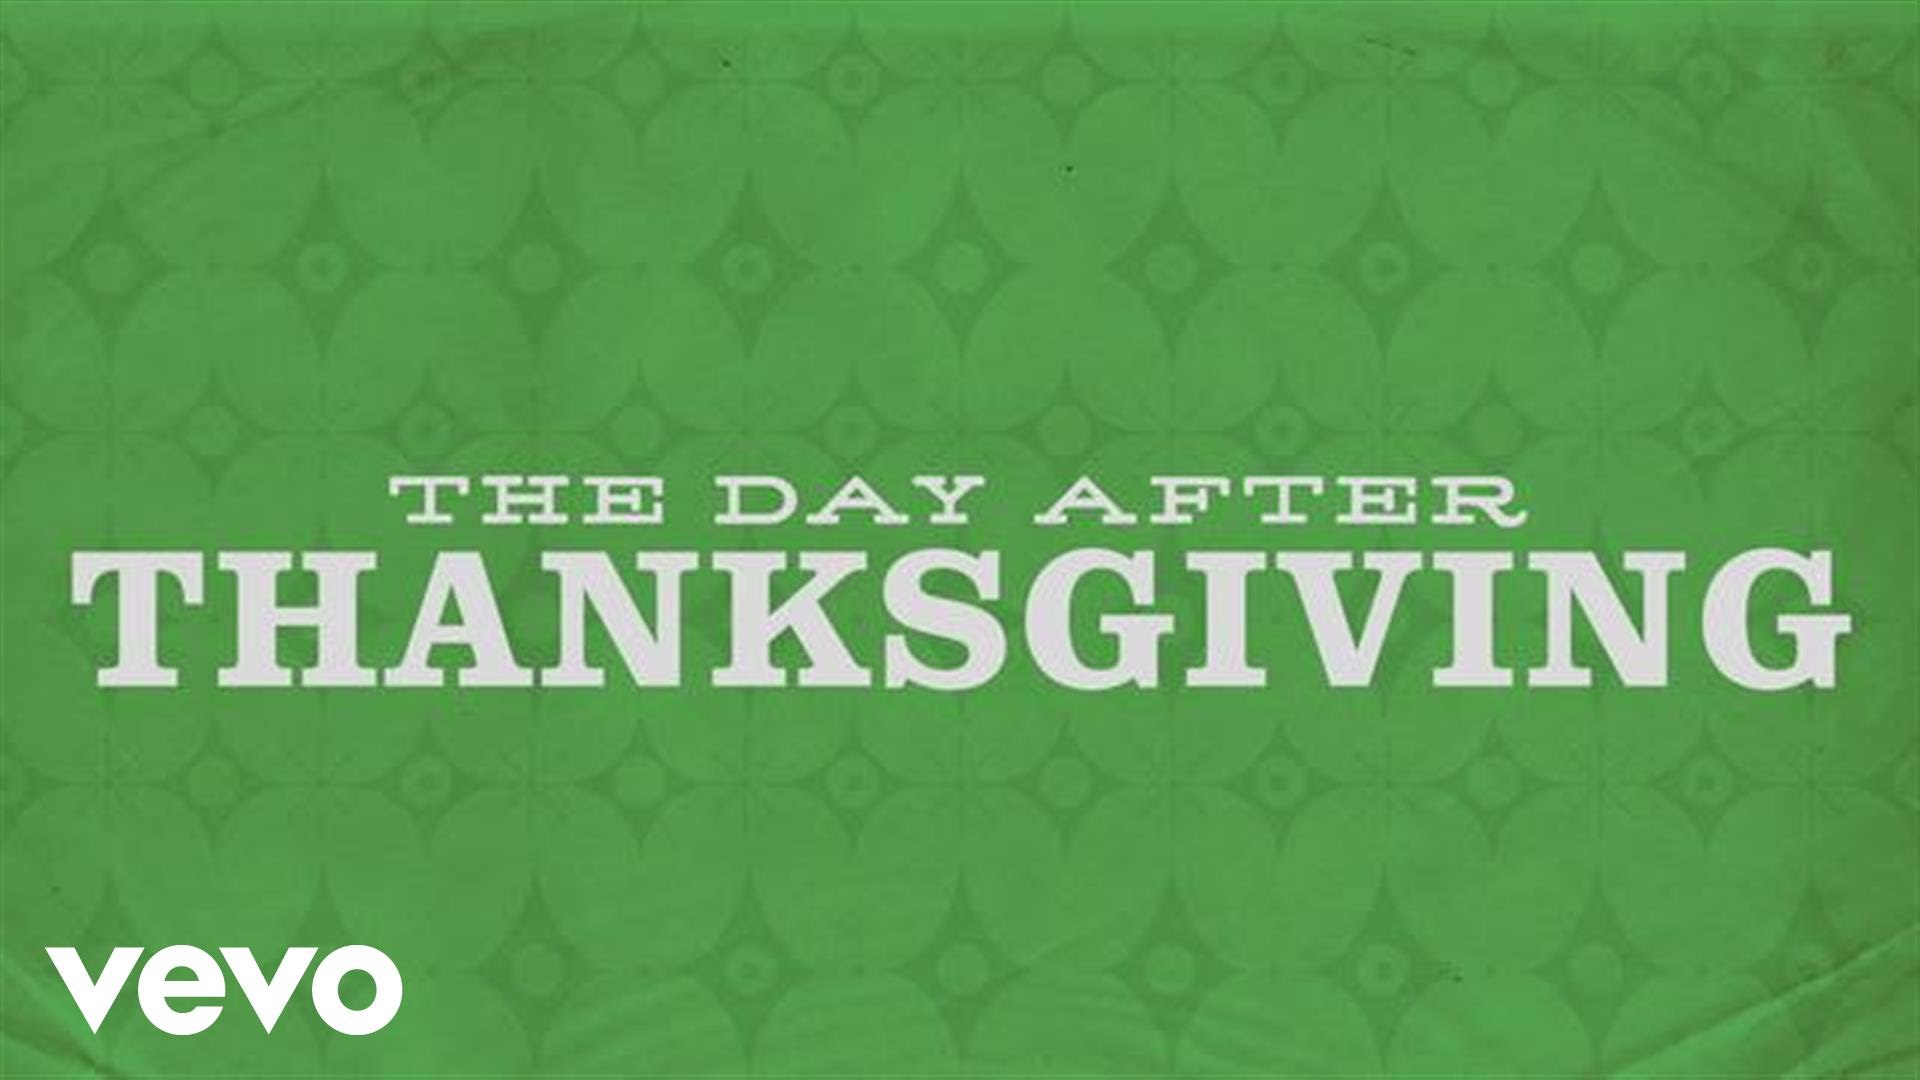 The Day After Thanksgiving Wishes